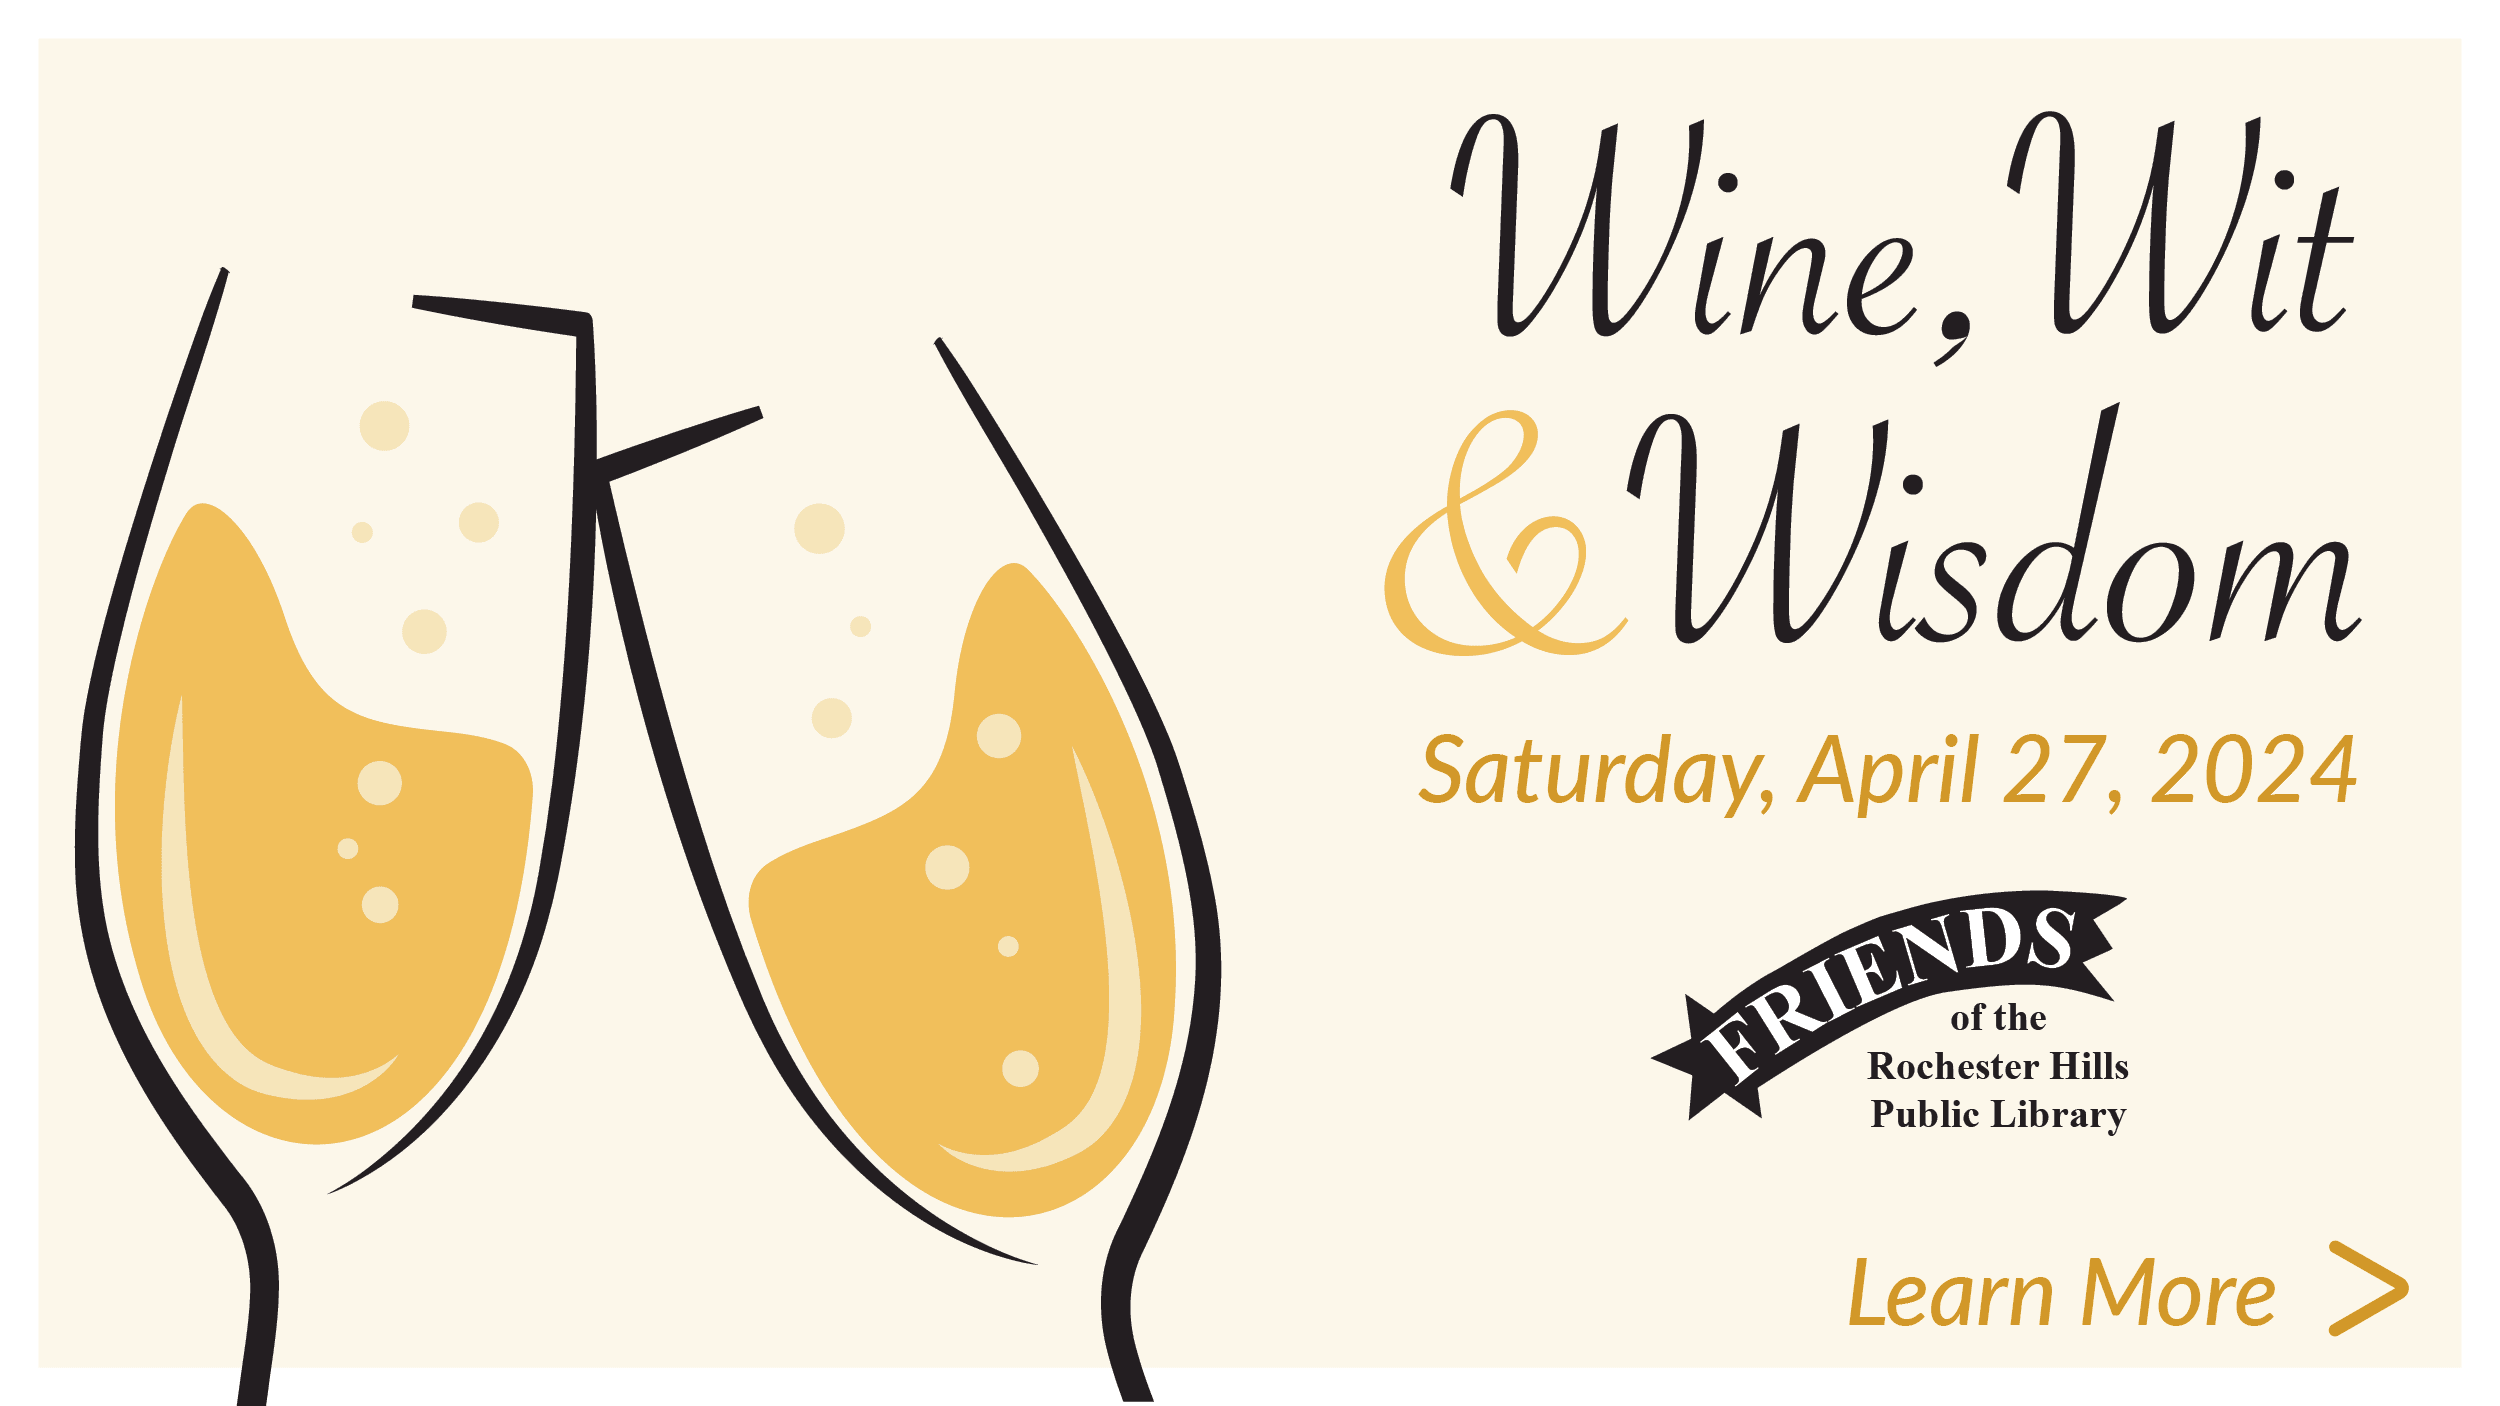 Friends of Rochester Hills Public Library. Wine, Wit, and Wisdom. Saturday, April 27, 2024. Friends of Rochester Hills Public Library. Learn More.